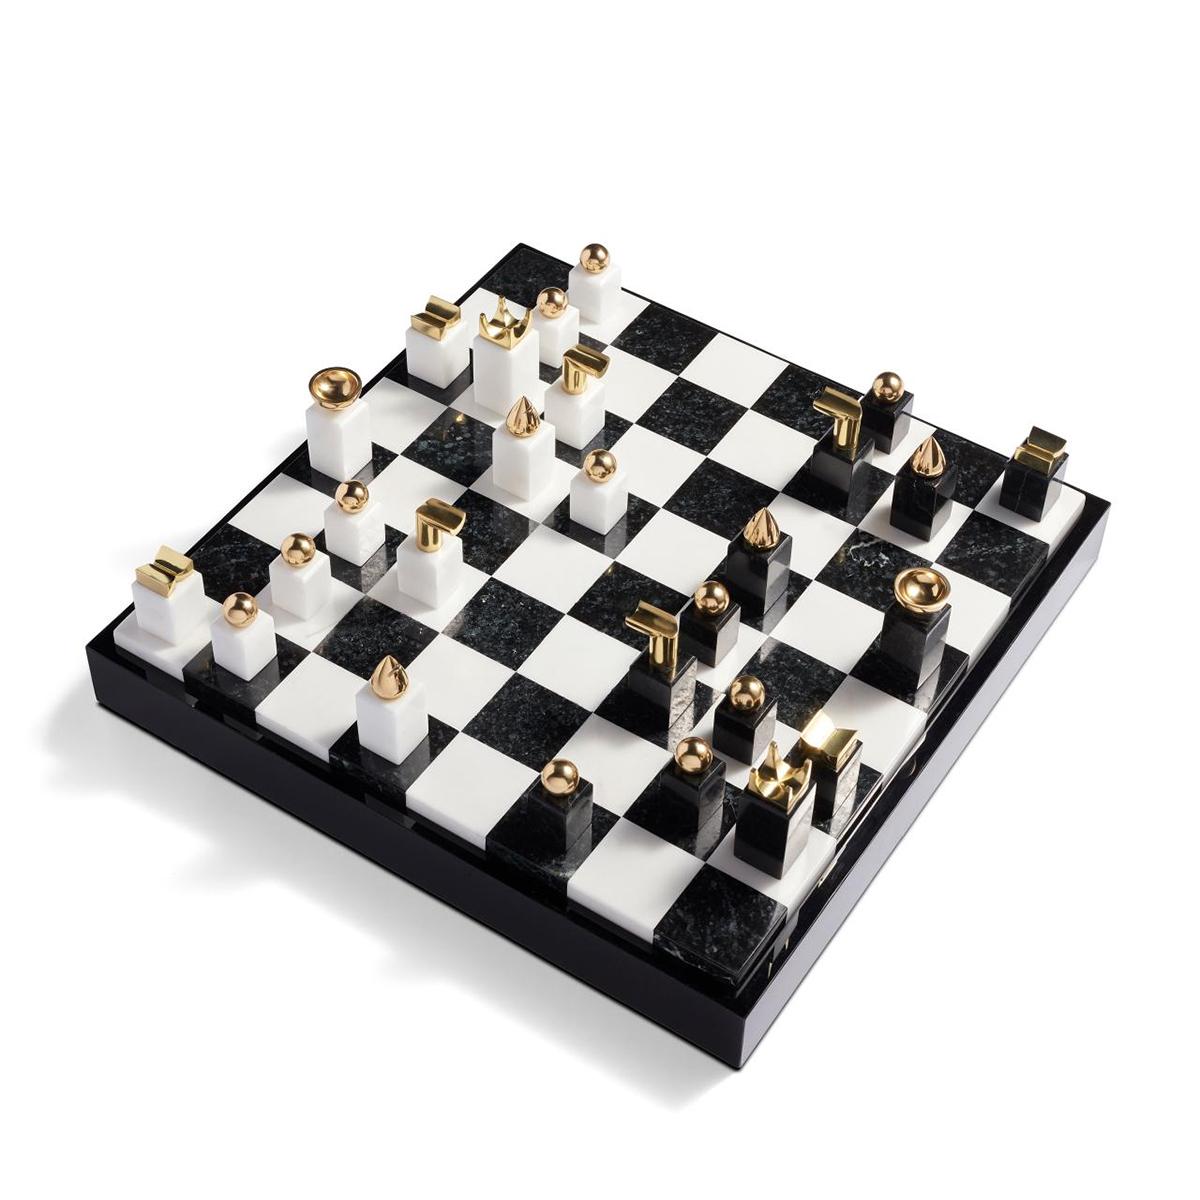 Chess stones game with black and white pieces made in stone
with 24-karat gold-plated metal ornaments. Checkerboard made with
black stone, white stone, black resin and wood. Checkerboard back
case include parts to store pieces. Chess stones game